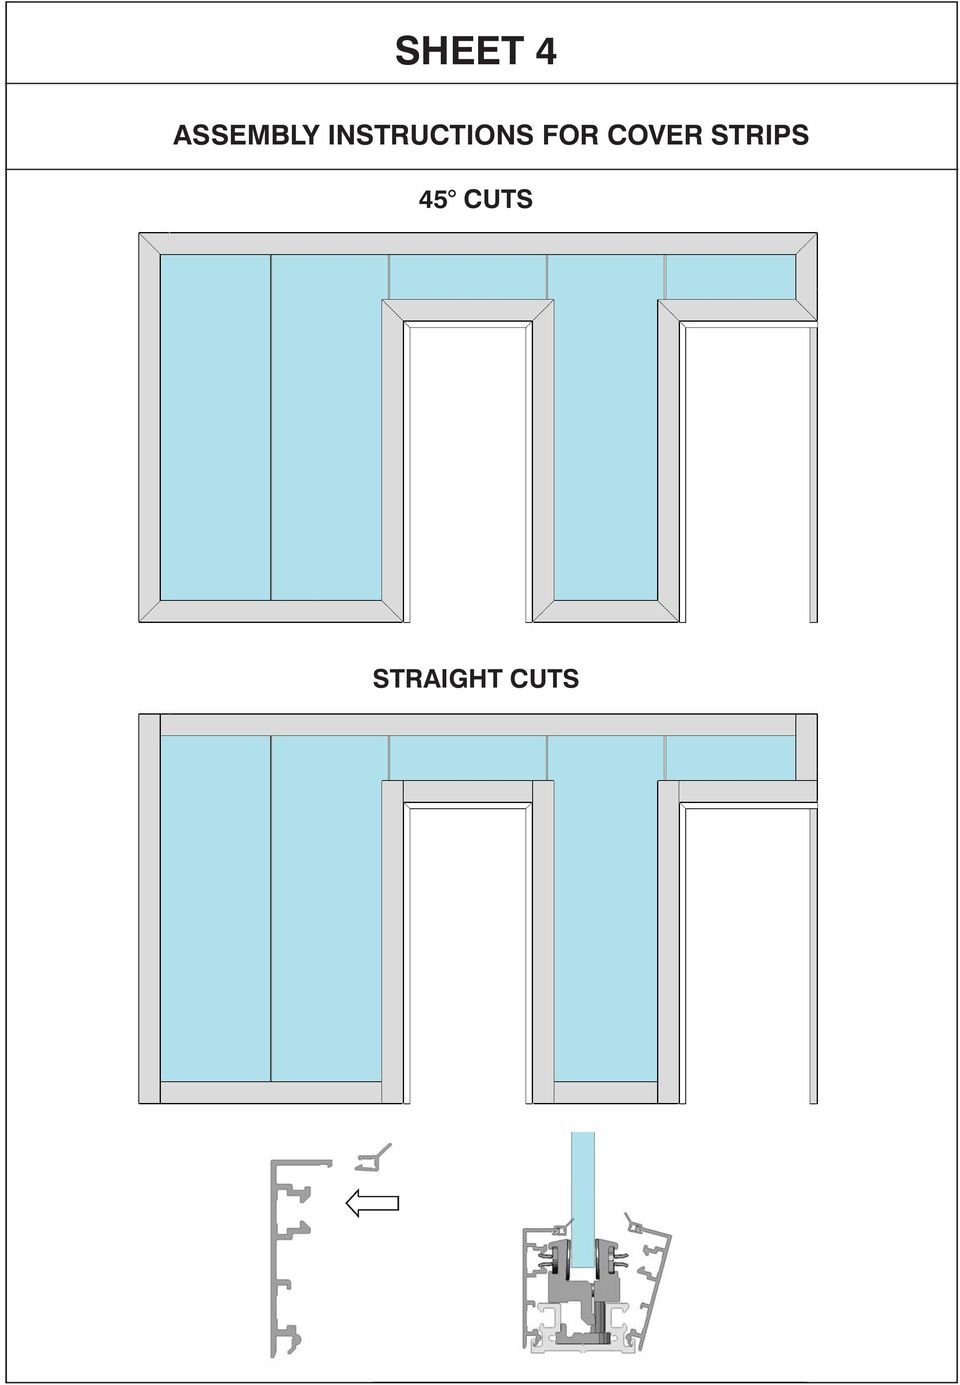 INSTRUCTIONS FOR COVER STRIPS